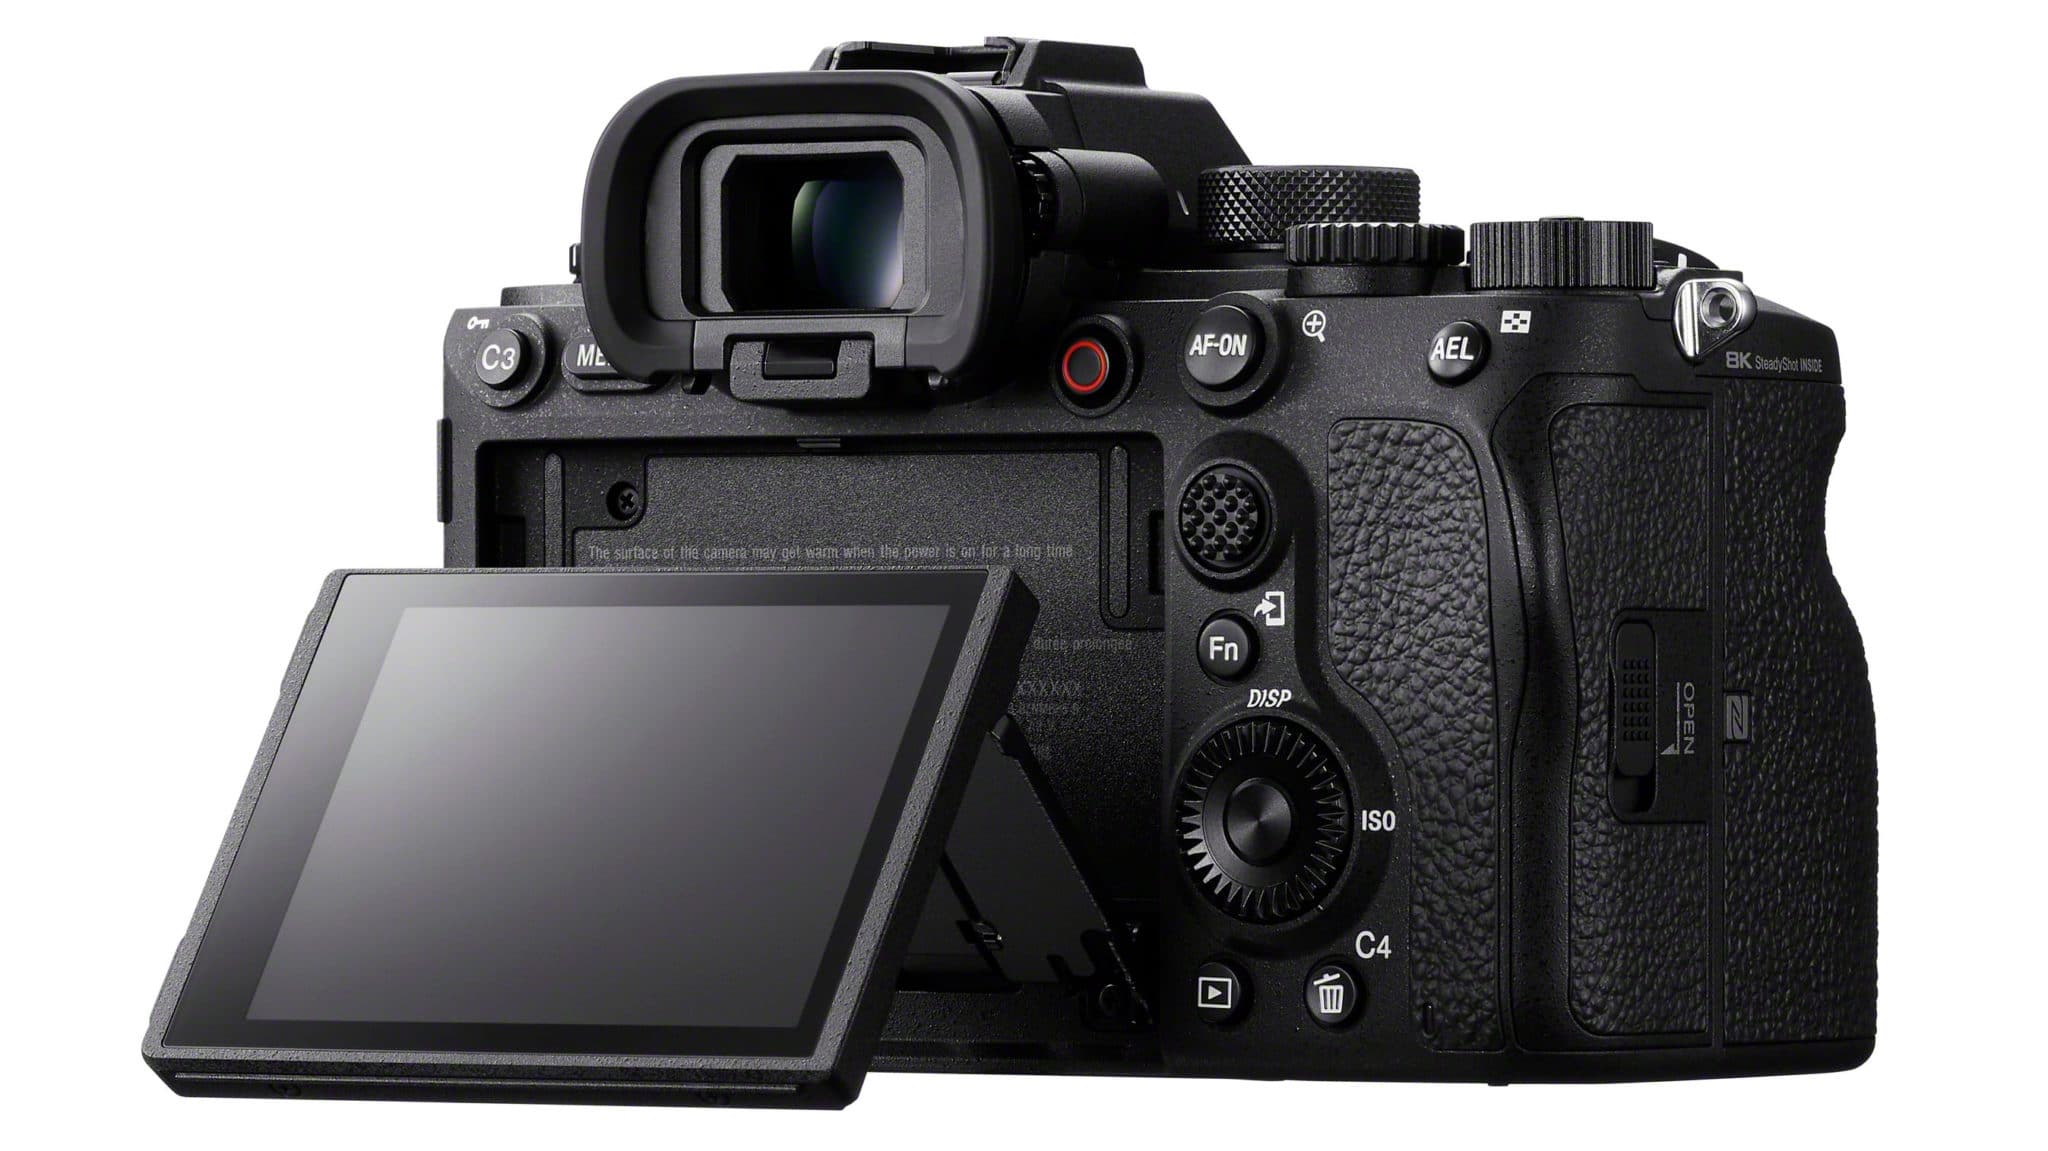 The flip-out screen of the Sony A1 Mirrorless Camera.